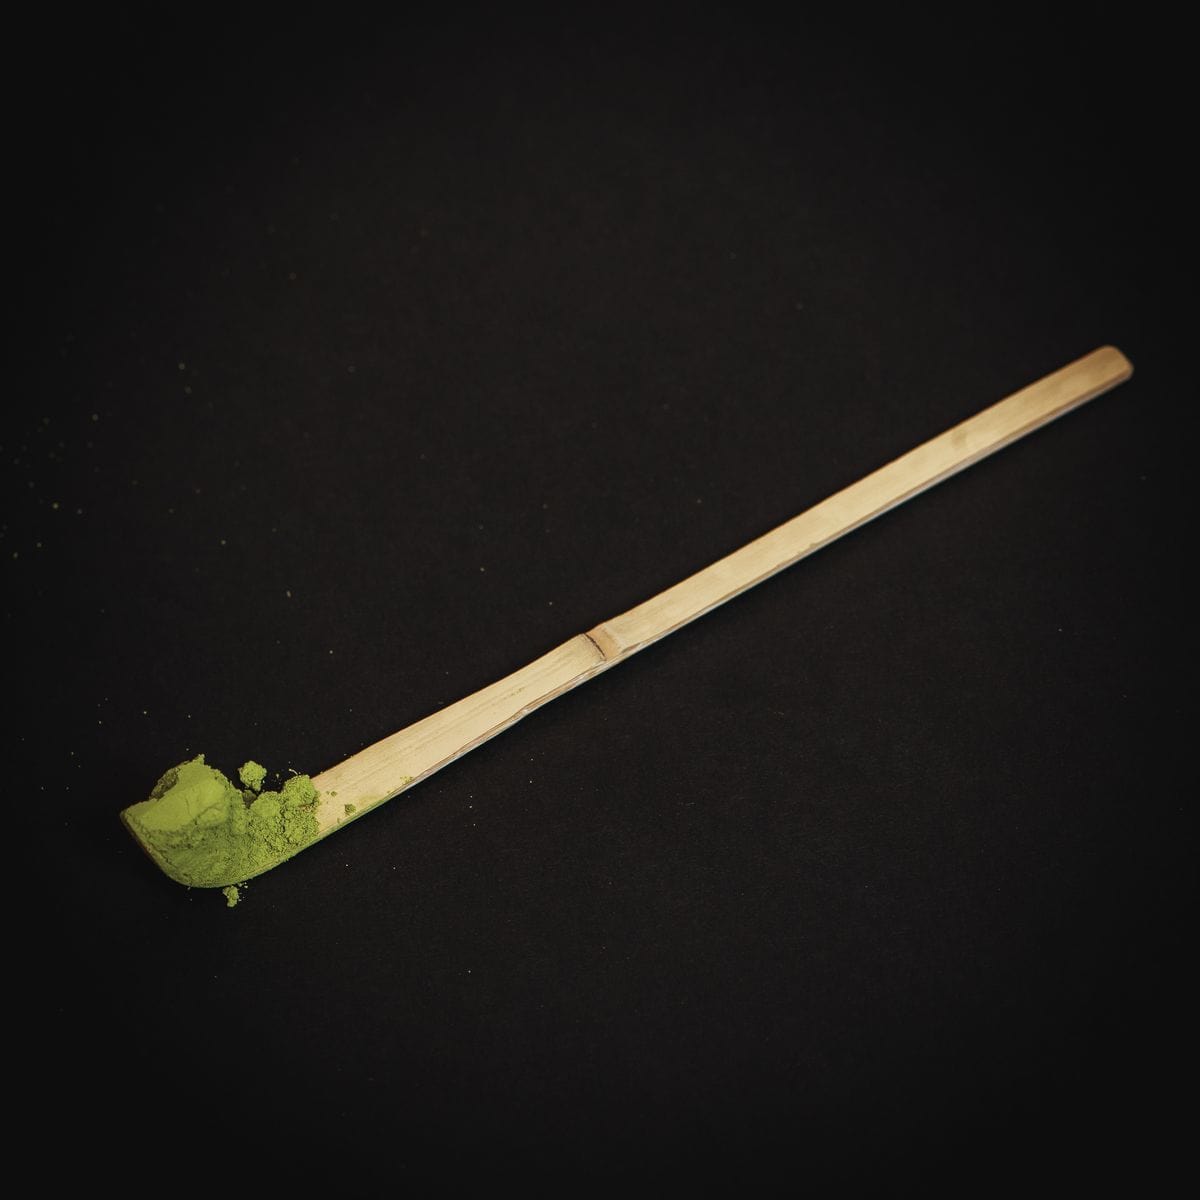 A Ceremonial Matcha Bamboo Scoop by Magic Hour sits on a dark background with some matcha powder on the scoop's end. The green of the matcha contrasts sharply with the dark setting, emphasizing its vibrant color—perfect for enjoying your Magic Hour moment.